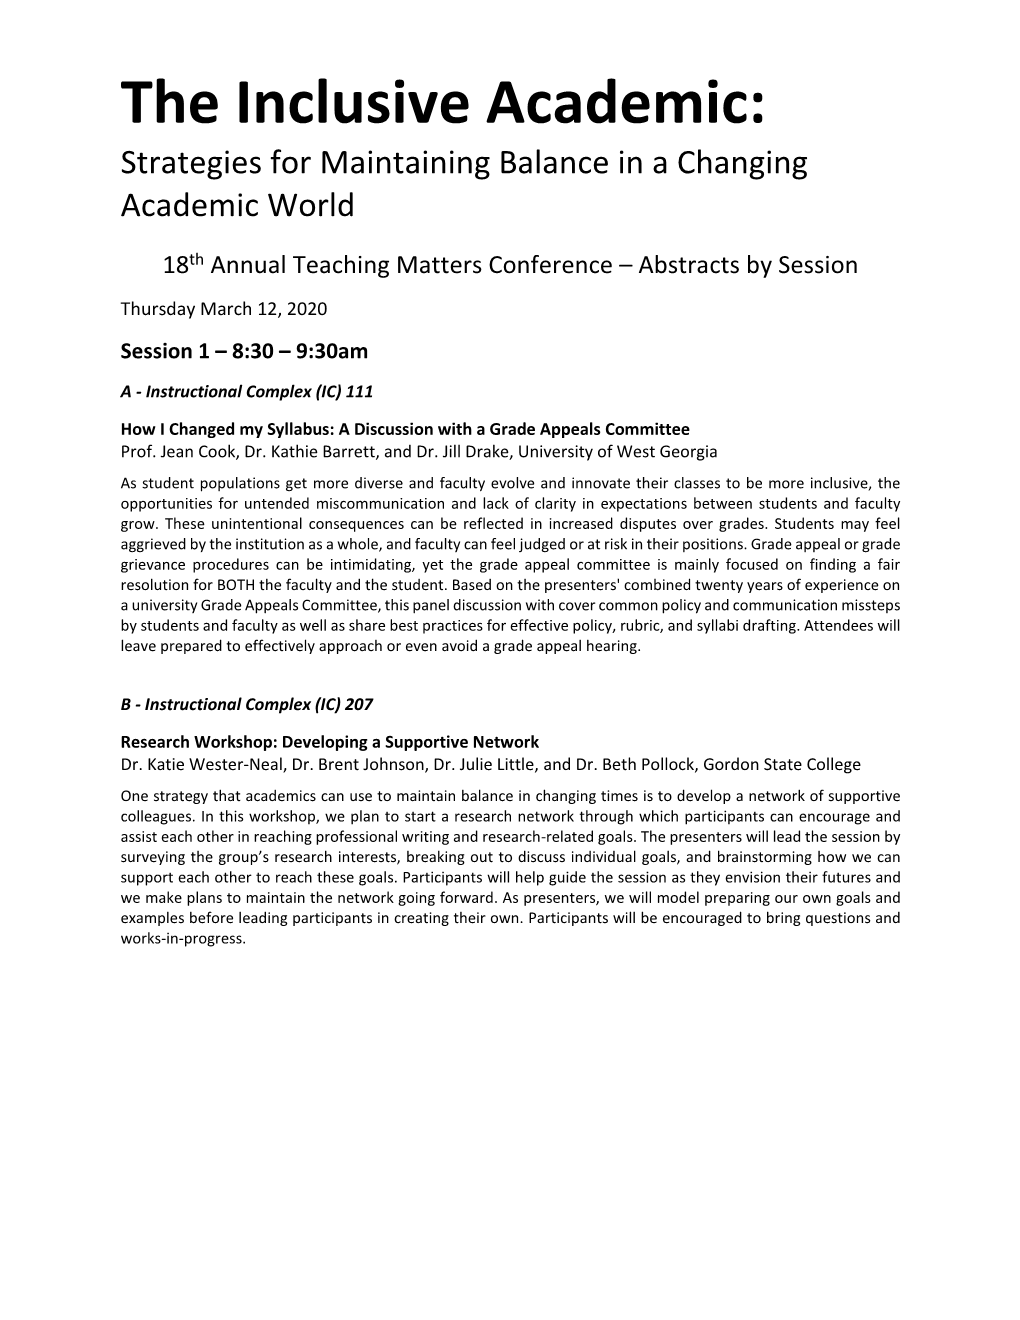 The Inclusive Academic: Strategies for Maintaining Balance in a Changing Academic World